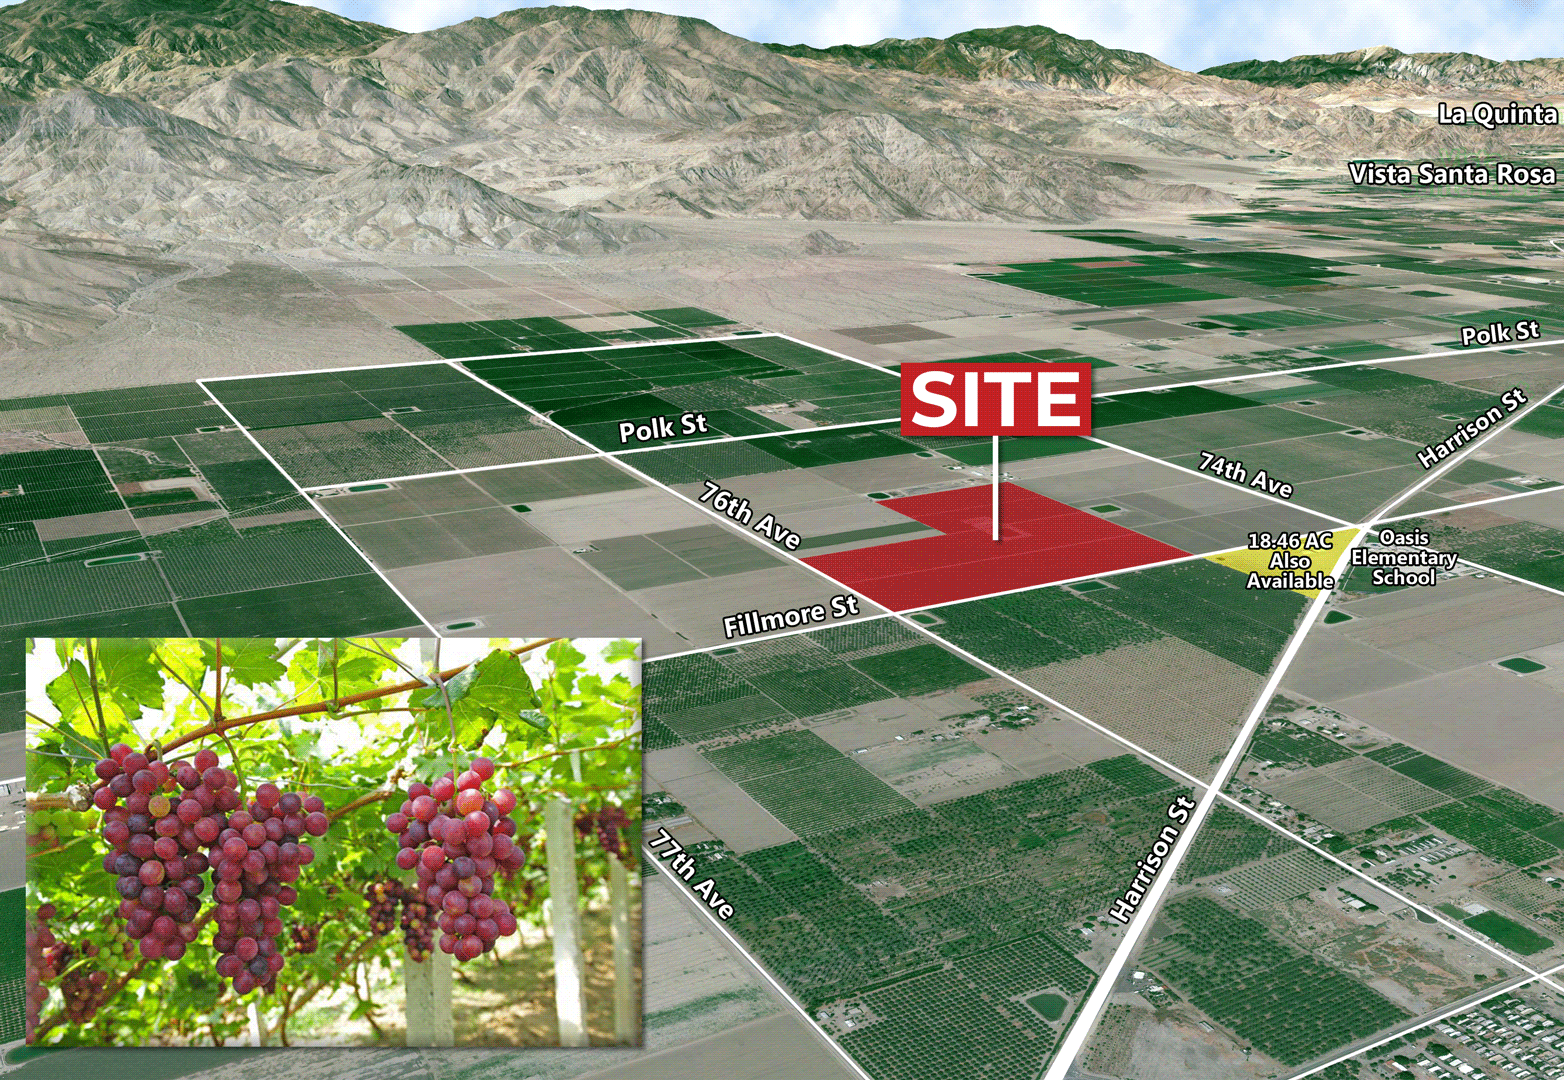 125.50 AC NWC Fillmore St & 76th Ave, Oasis Tilt Aerial v2 Featured Web